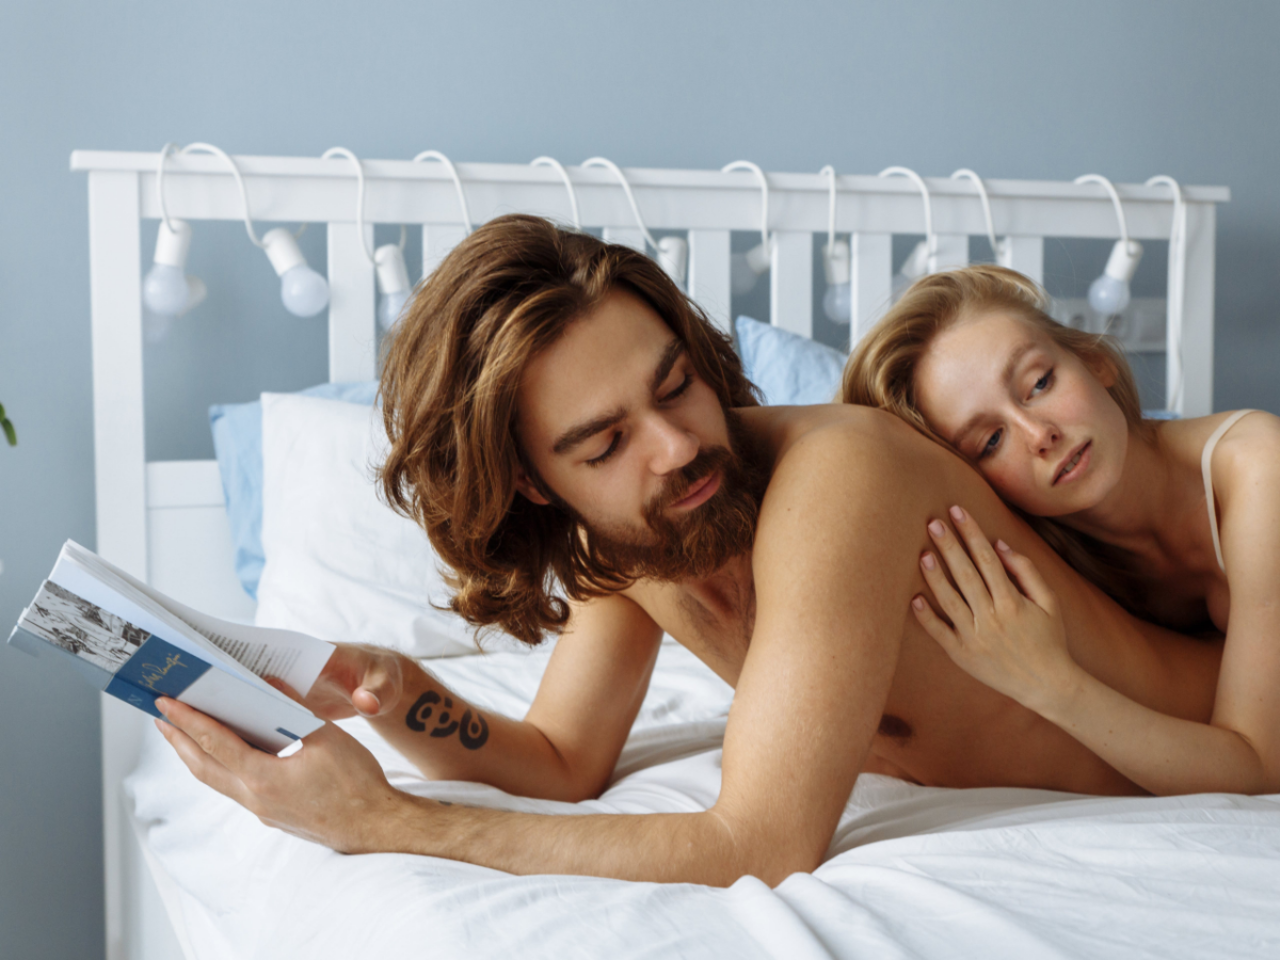 These are the pros and cons of sexual fantasies in relationships photo image